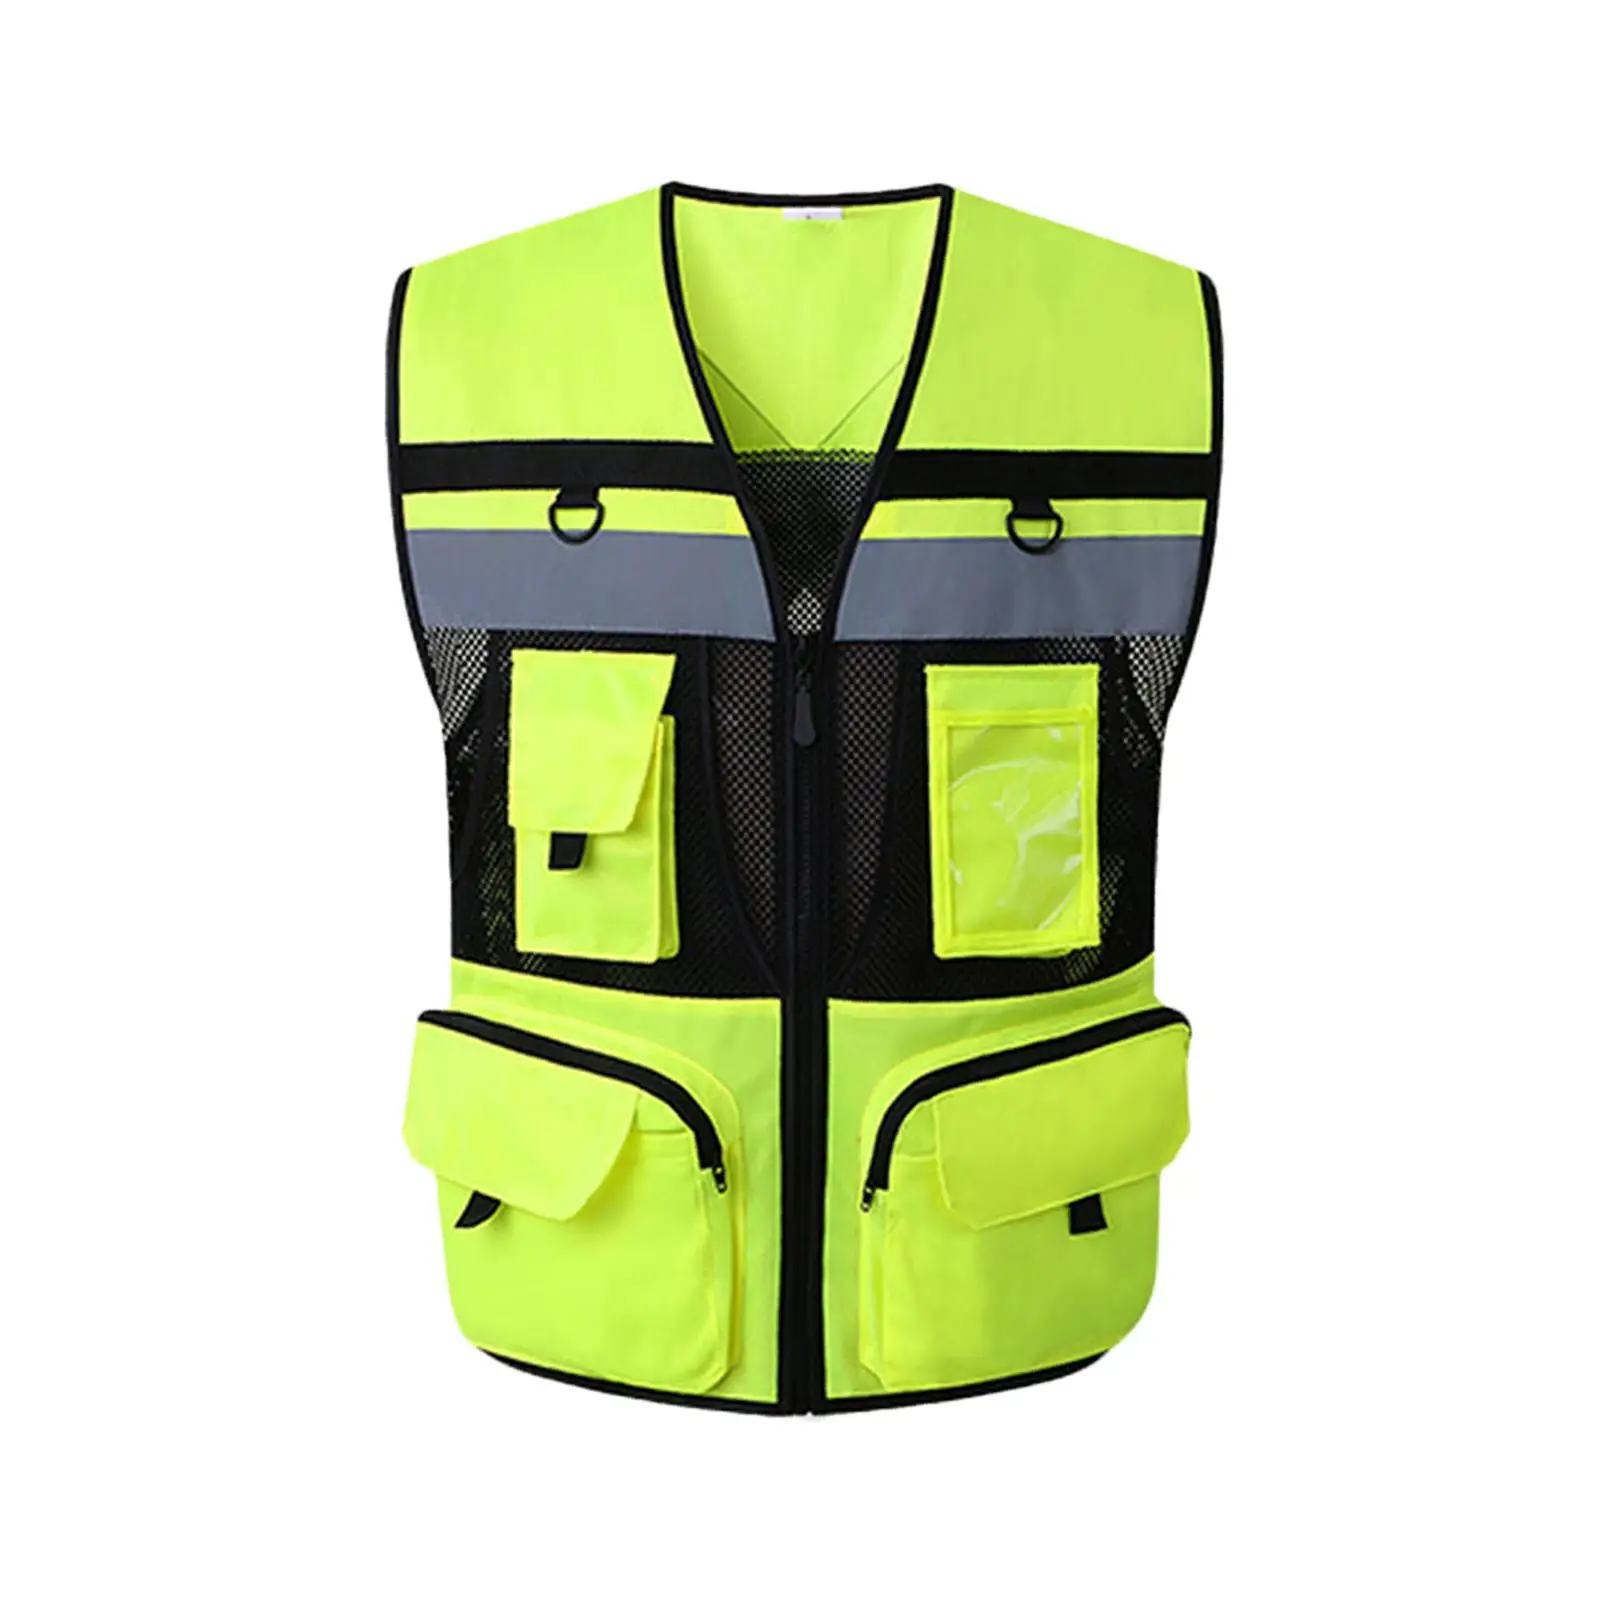 Men Reflective , Running Gear with Pockets Lightweight Safety  for   Hiking Warehouse Construction Parking Attendants